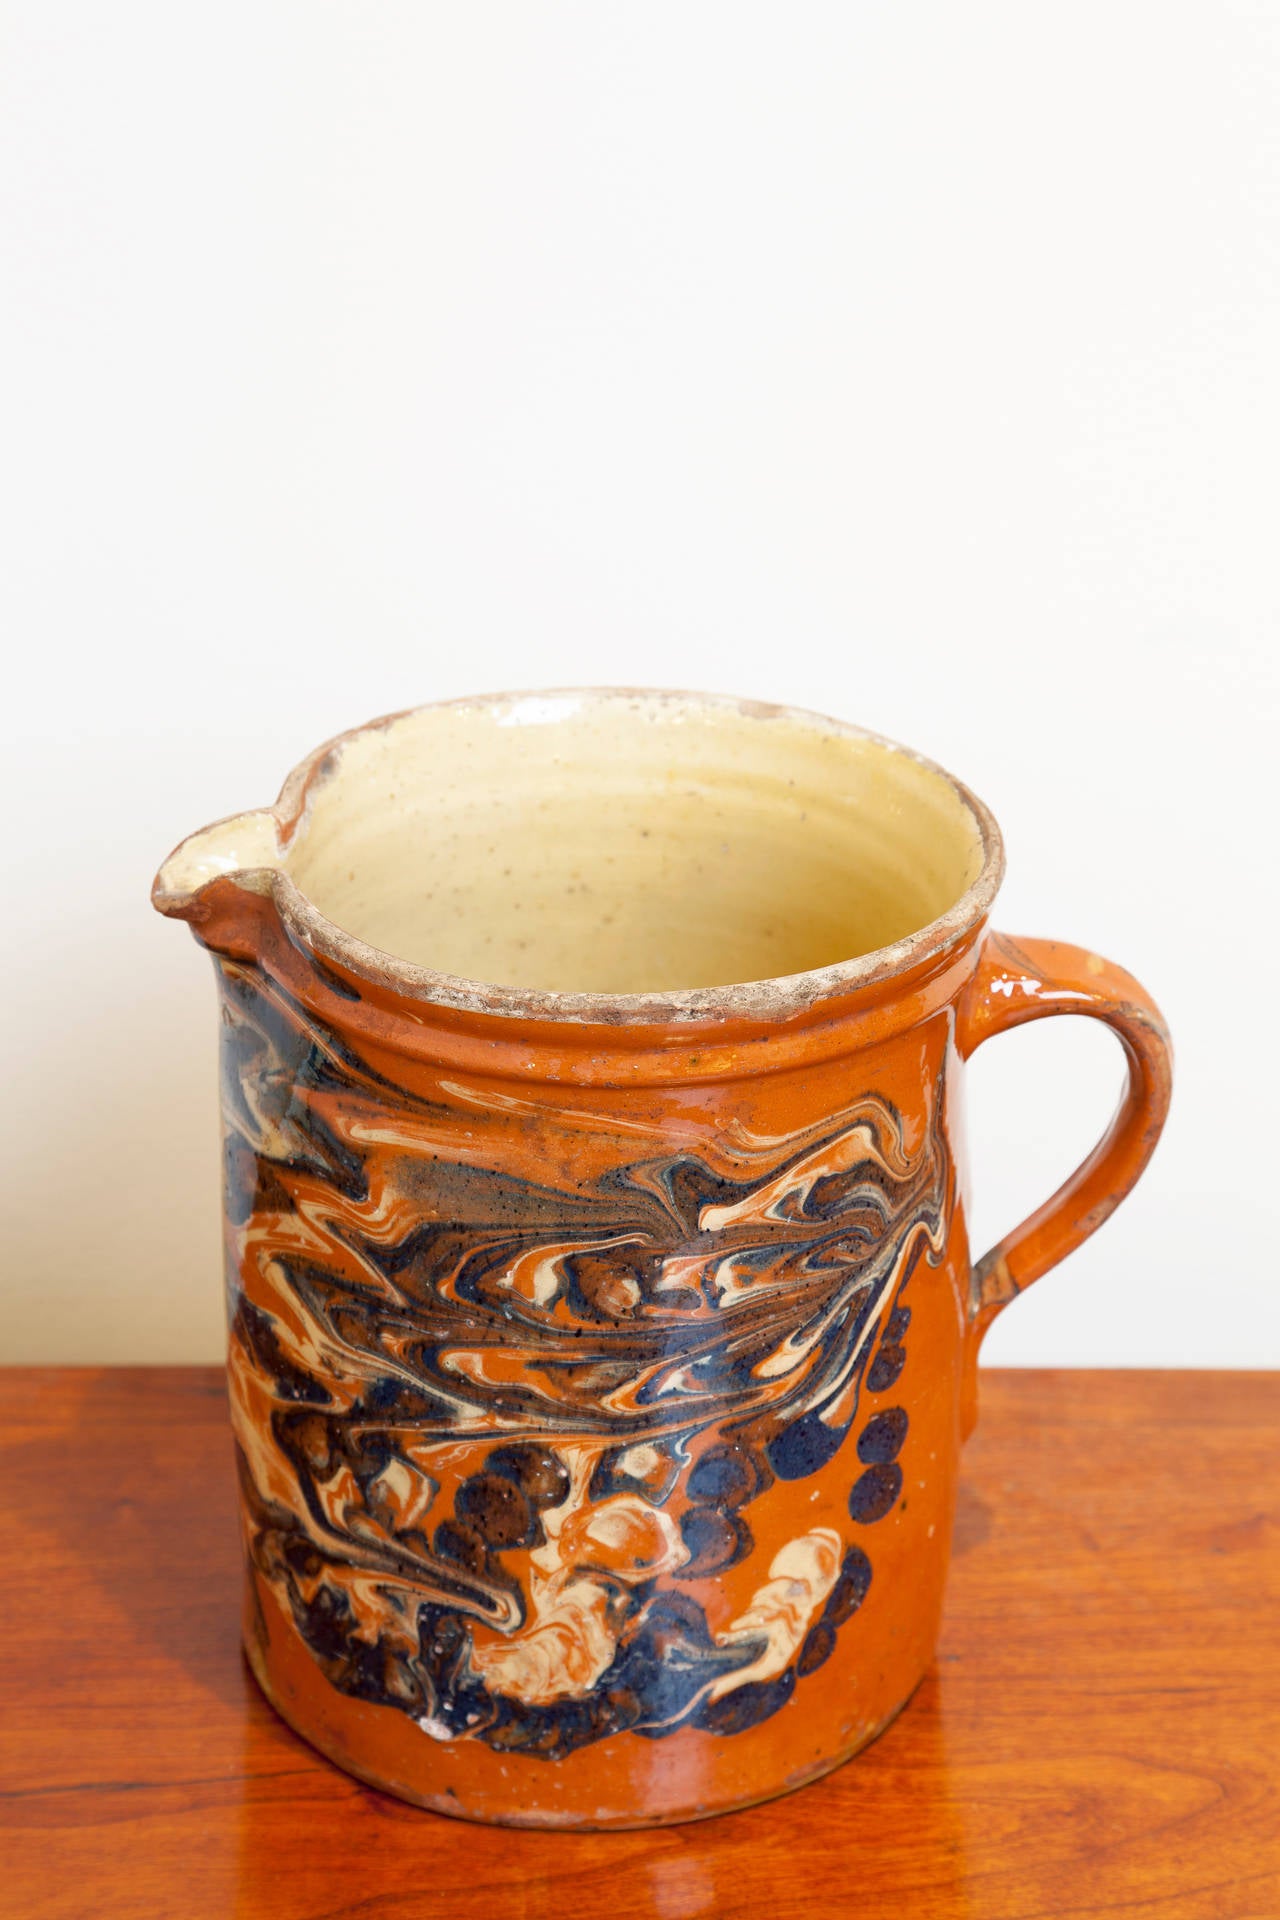 Jaspe Pottery Jug, late 19th Century, France. Traditional slip-glazed with marbleized pattern from the Savoie Region.